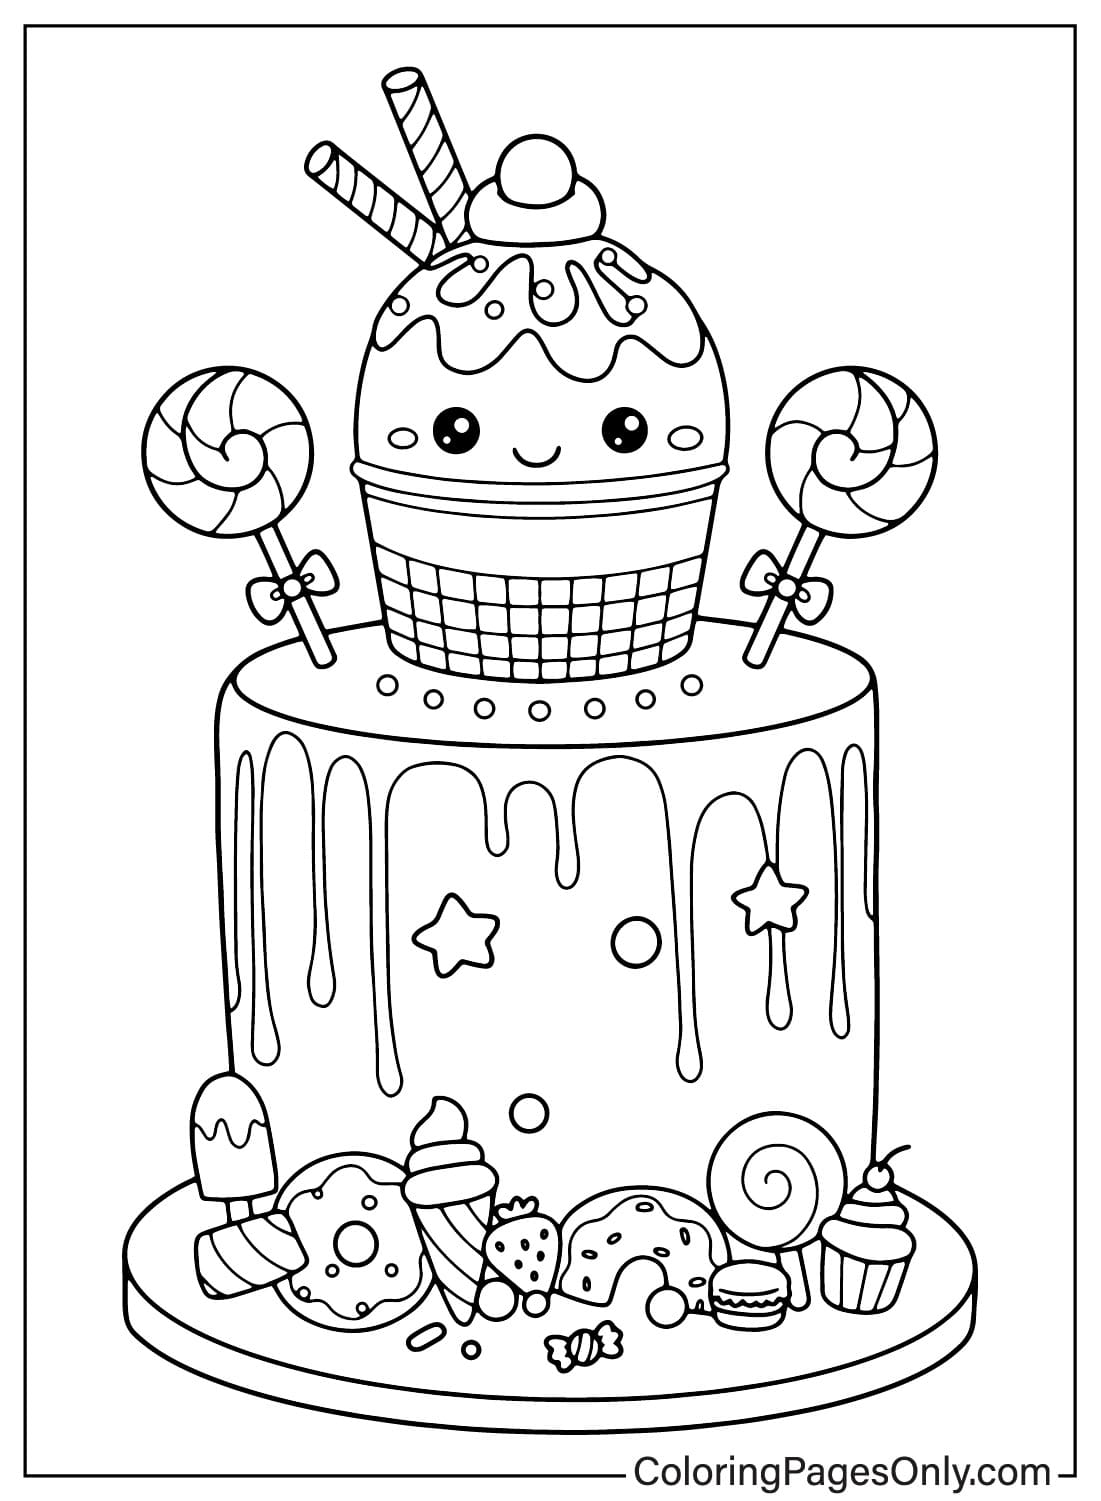 Birthday Cake to Color from Birthday Cake